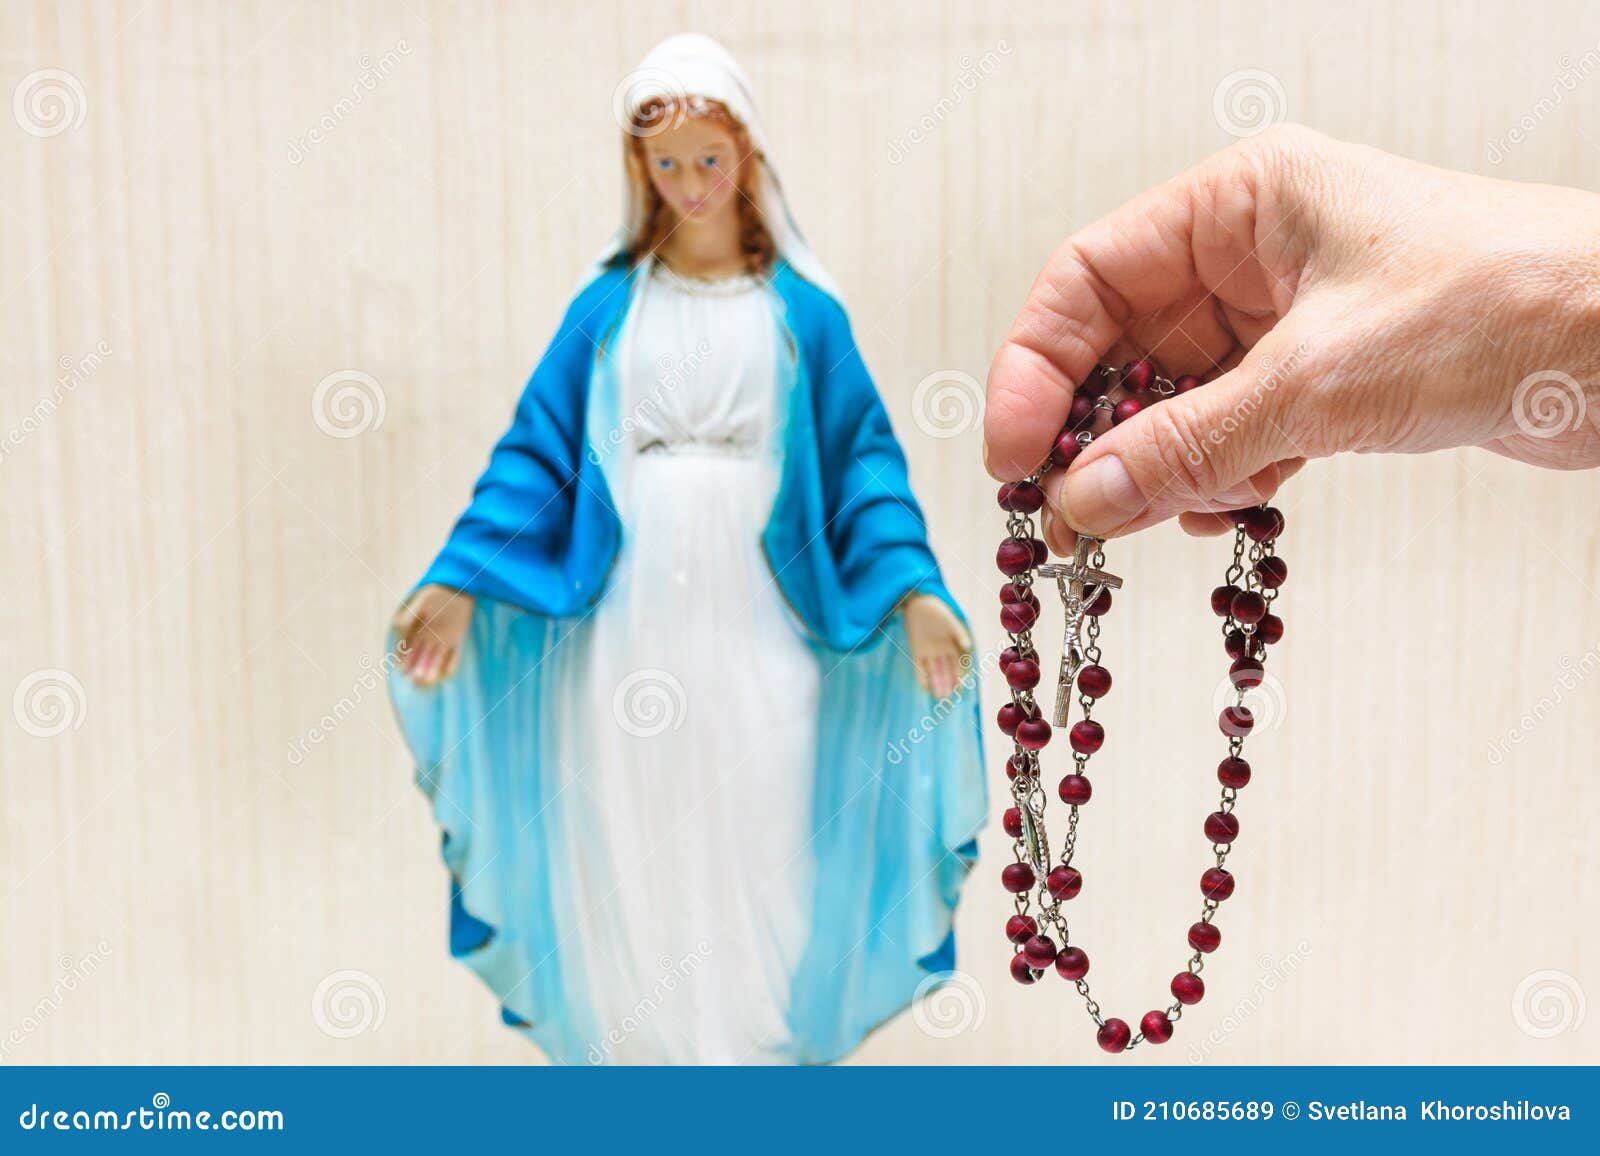 Mother Mary Wallpaper 53 images